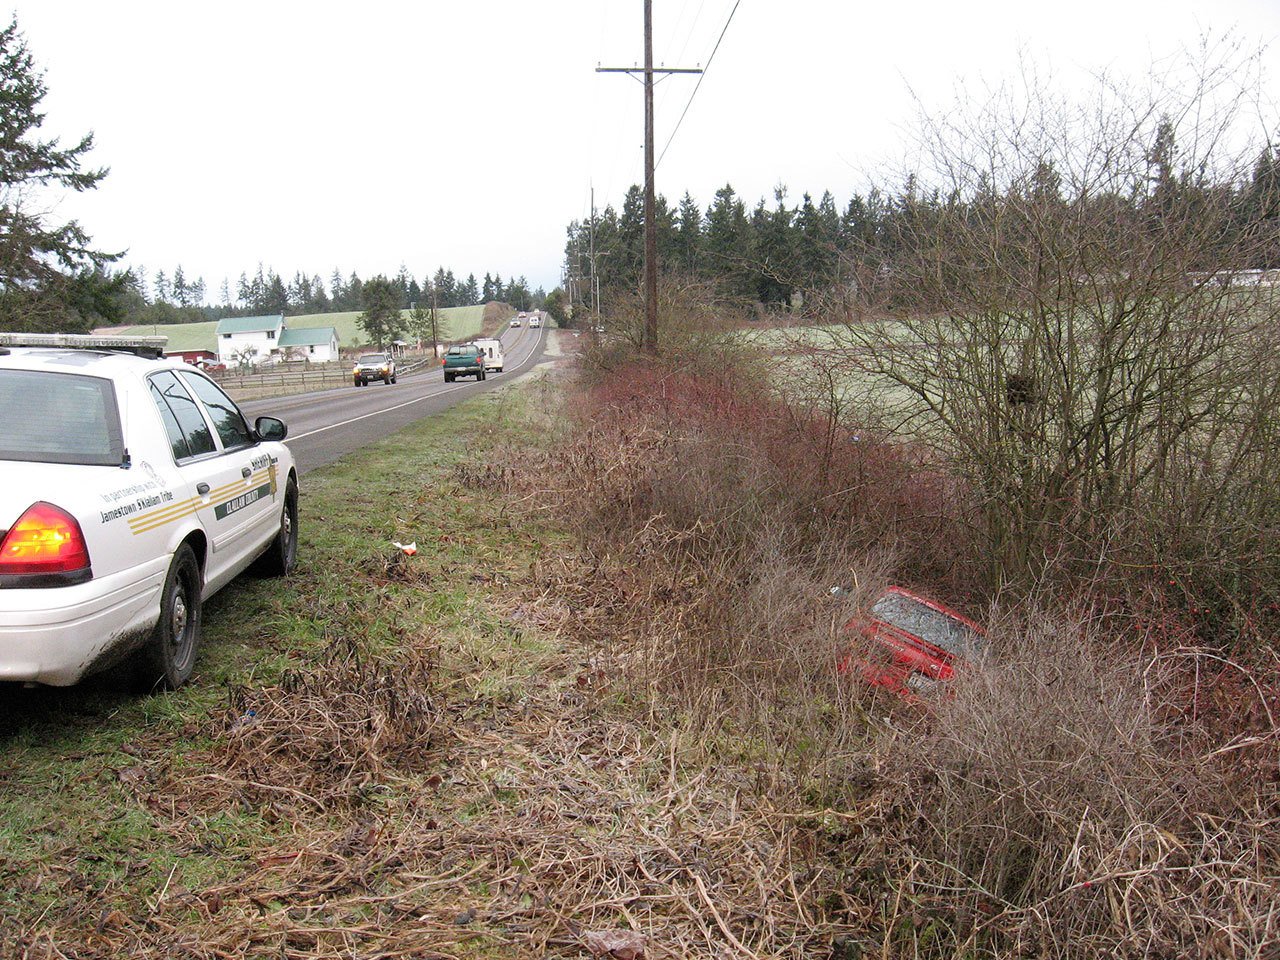 A Clallam County Sheriff’s Office cruiser sits along Sequim-Dungeness Way above a Toyota Celica found along the roadway. A man walking a dog found the Toyota and called 9-1-1, leading to the rescue of a Sequim resident parked inside. (Brandon Stoppani/Clallam County Sheriff’s Office)